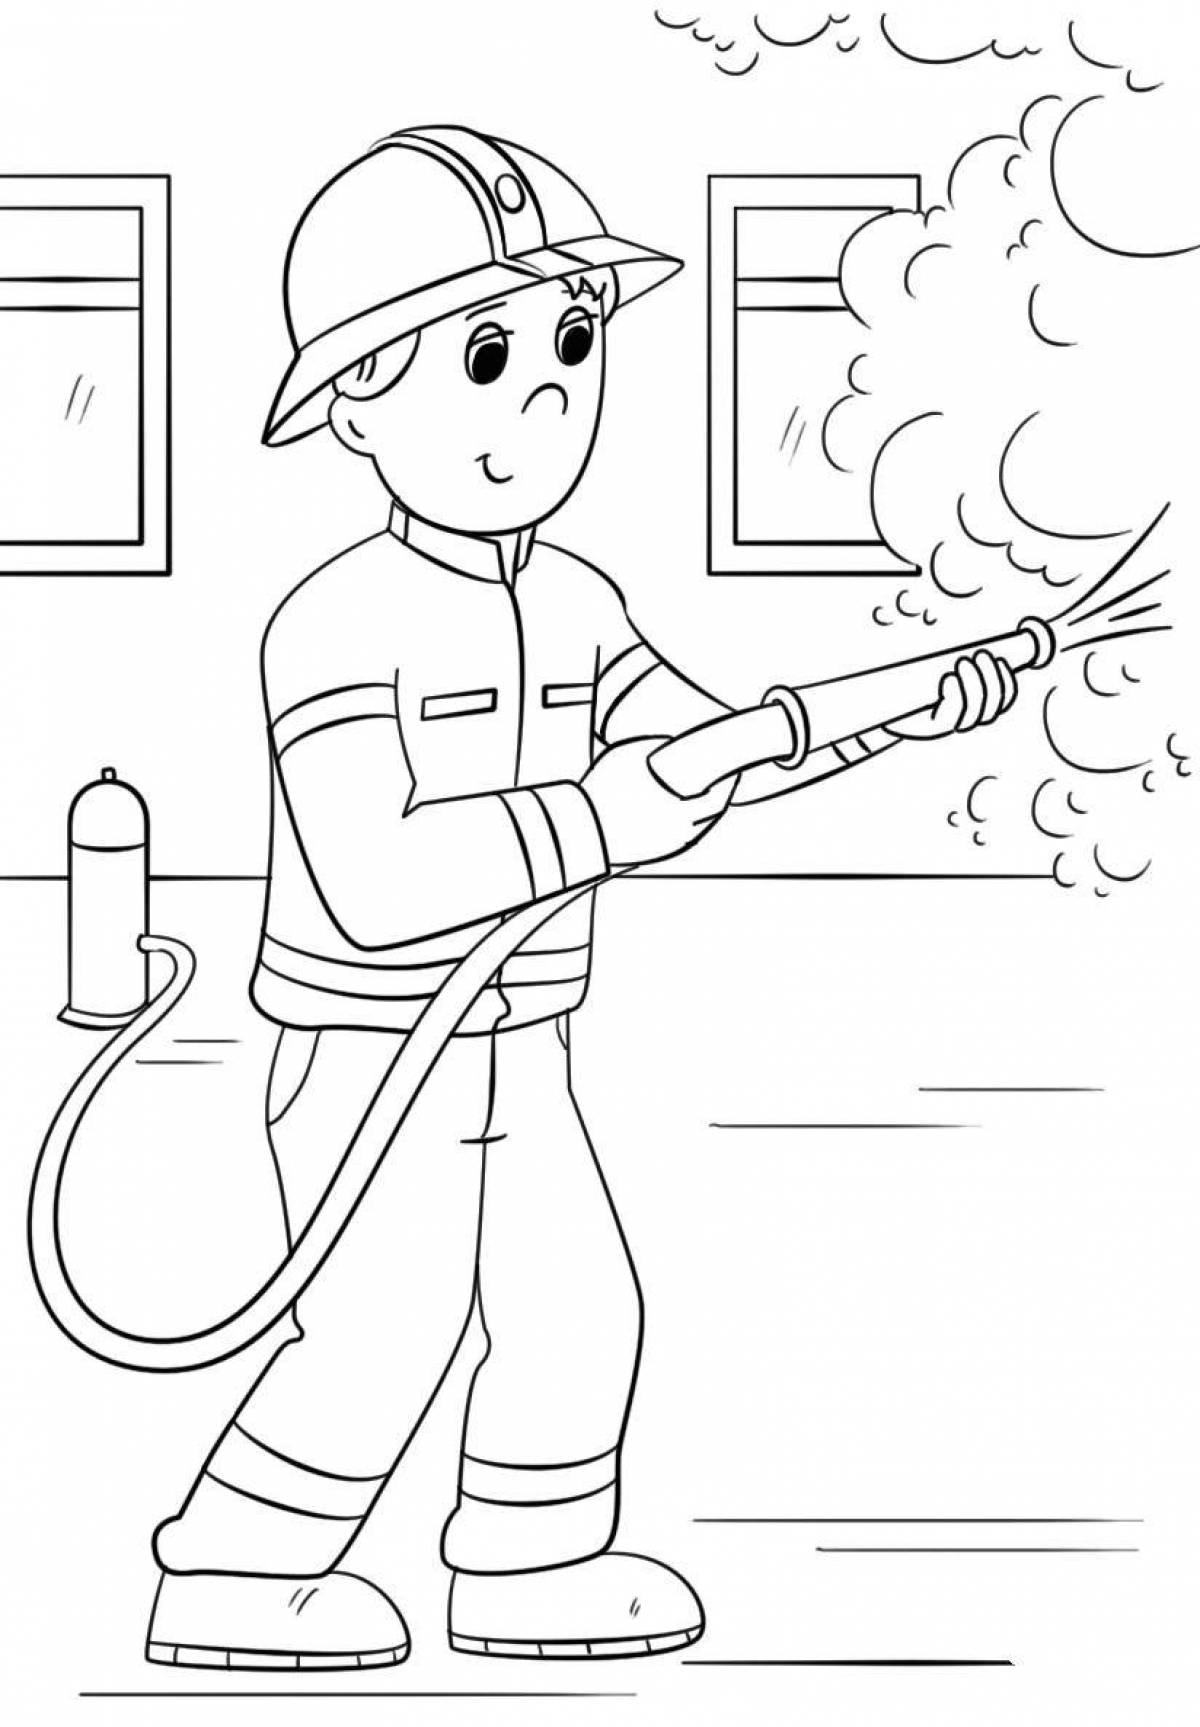 Great fire safety coloring book for kindergarten